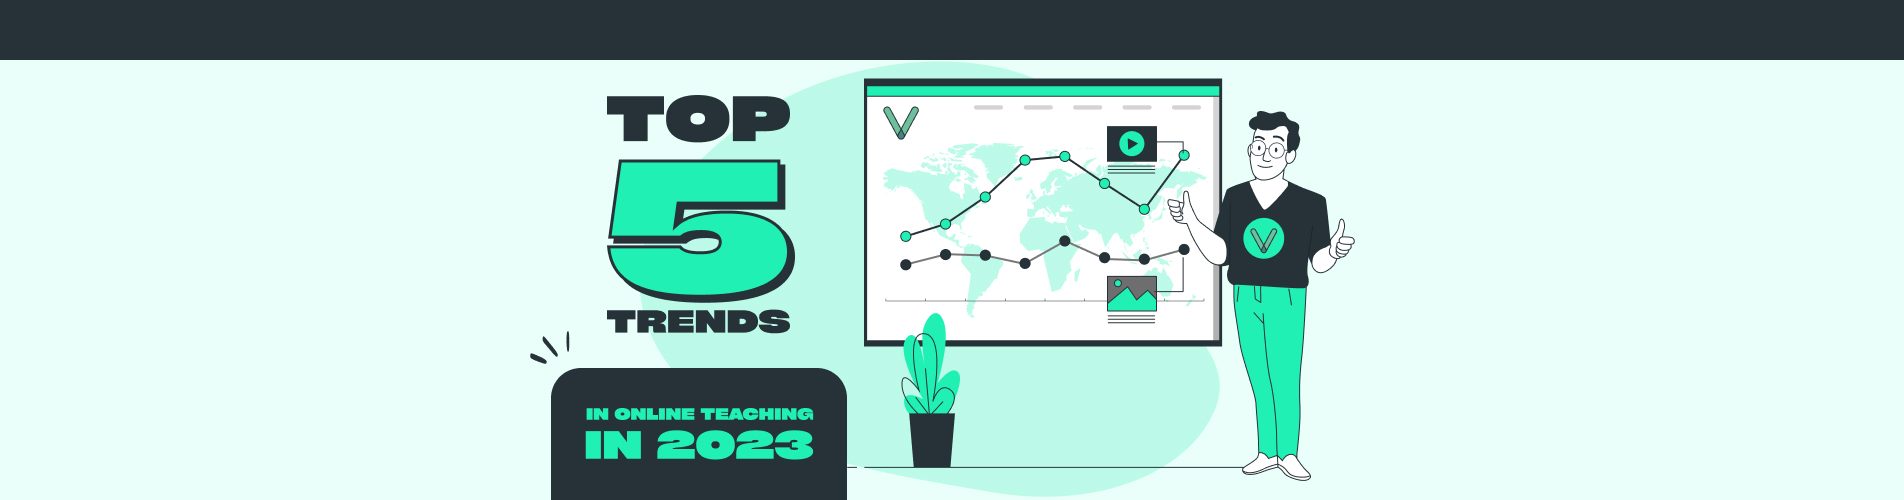 Top 5 Trends in Online Teaching for 2023